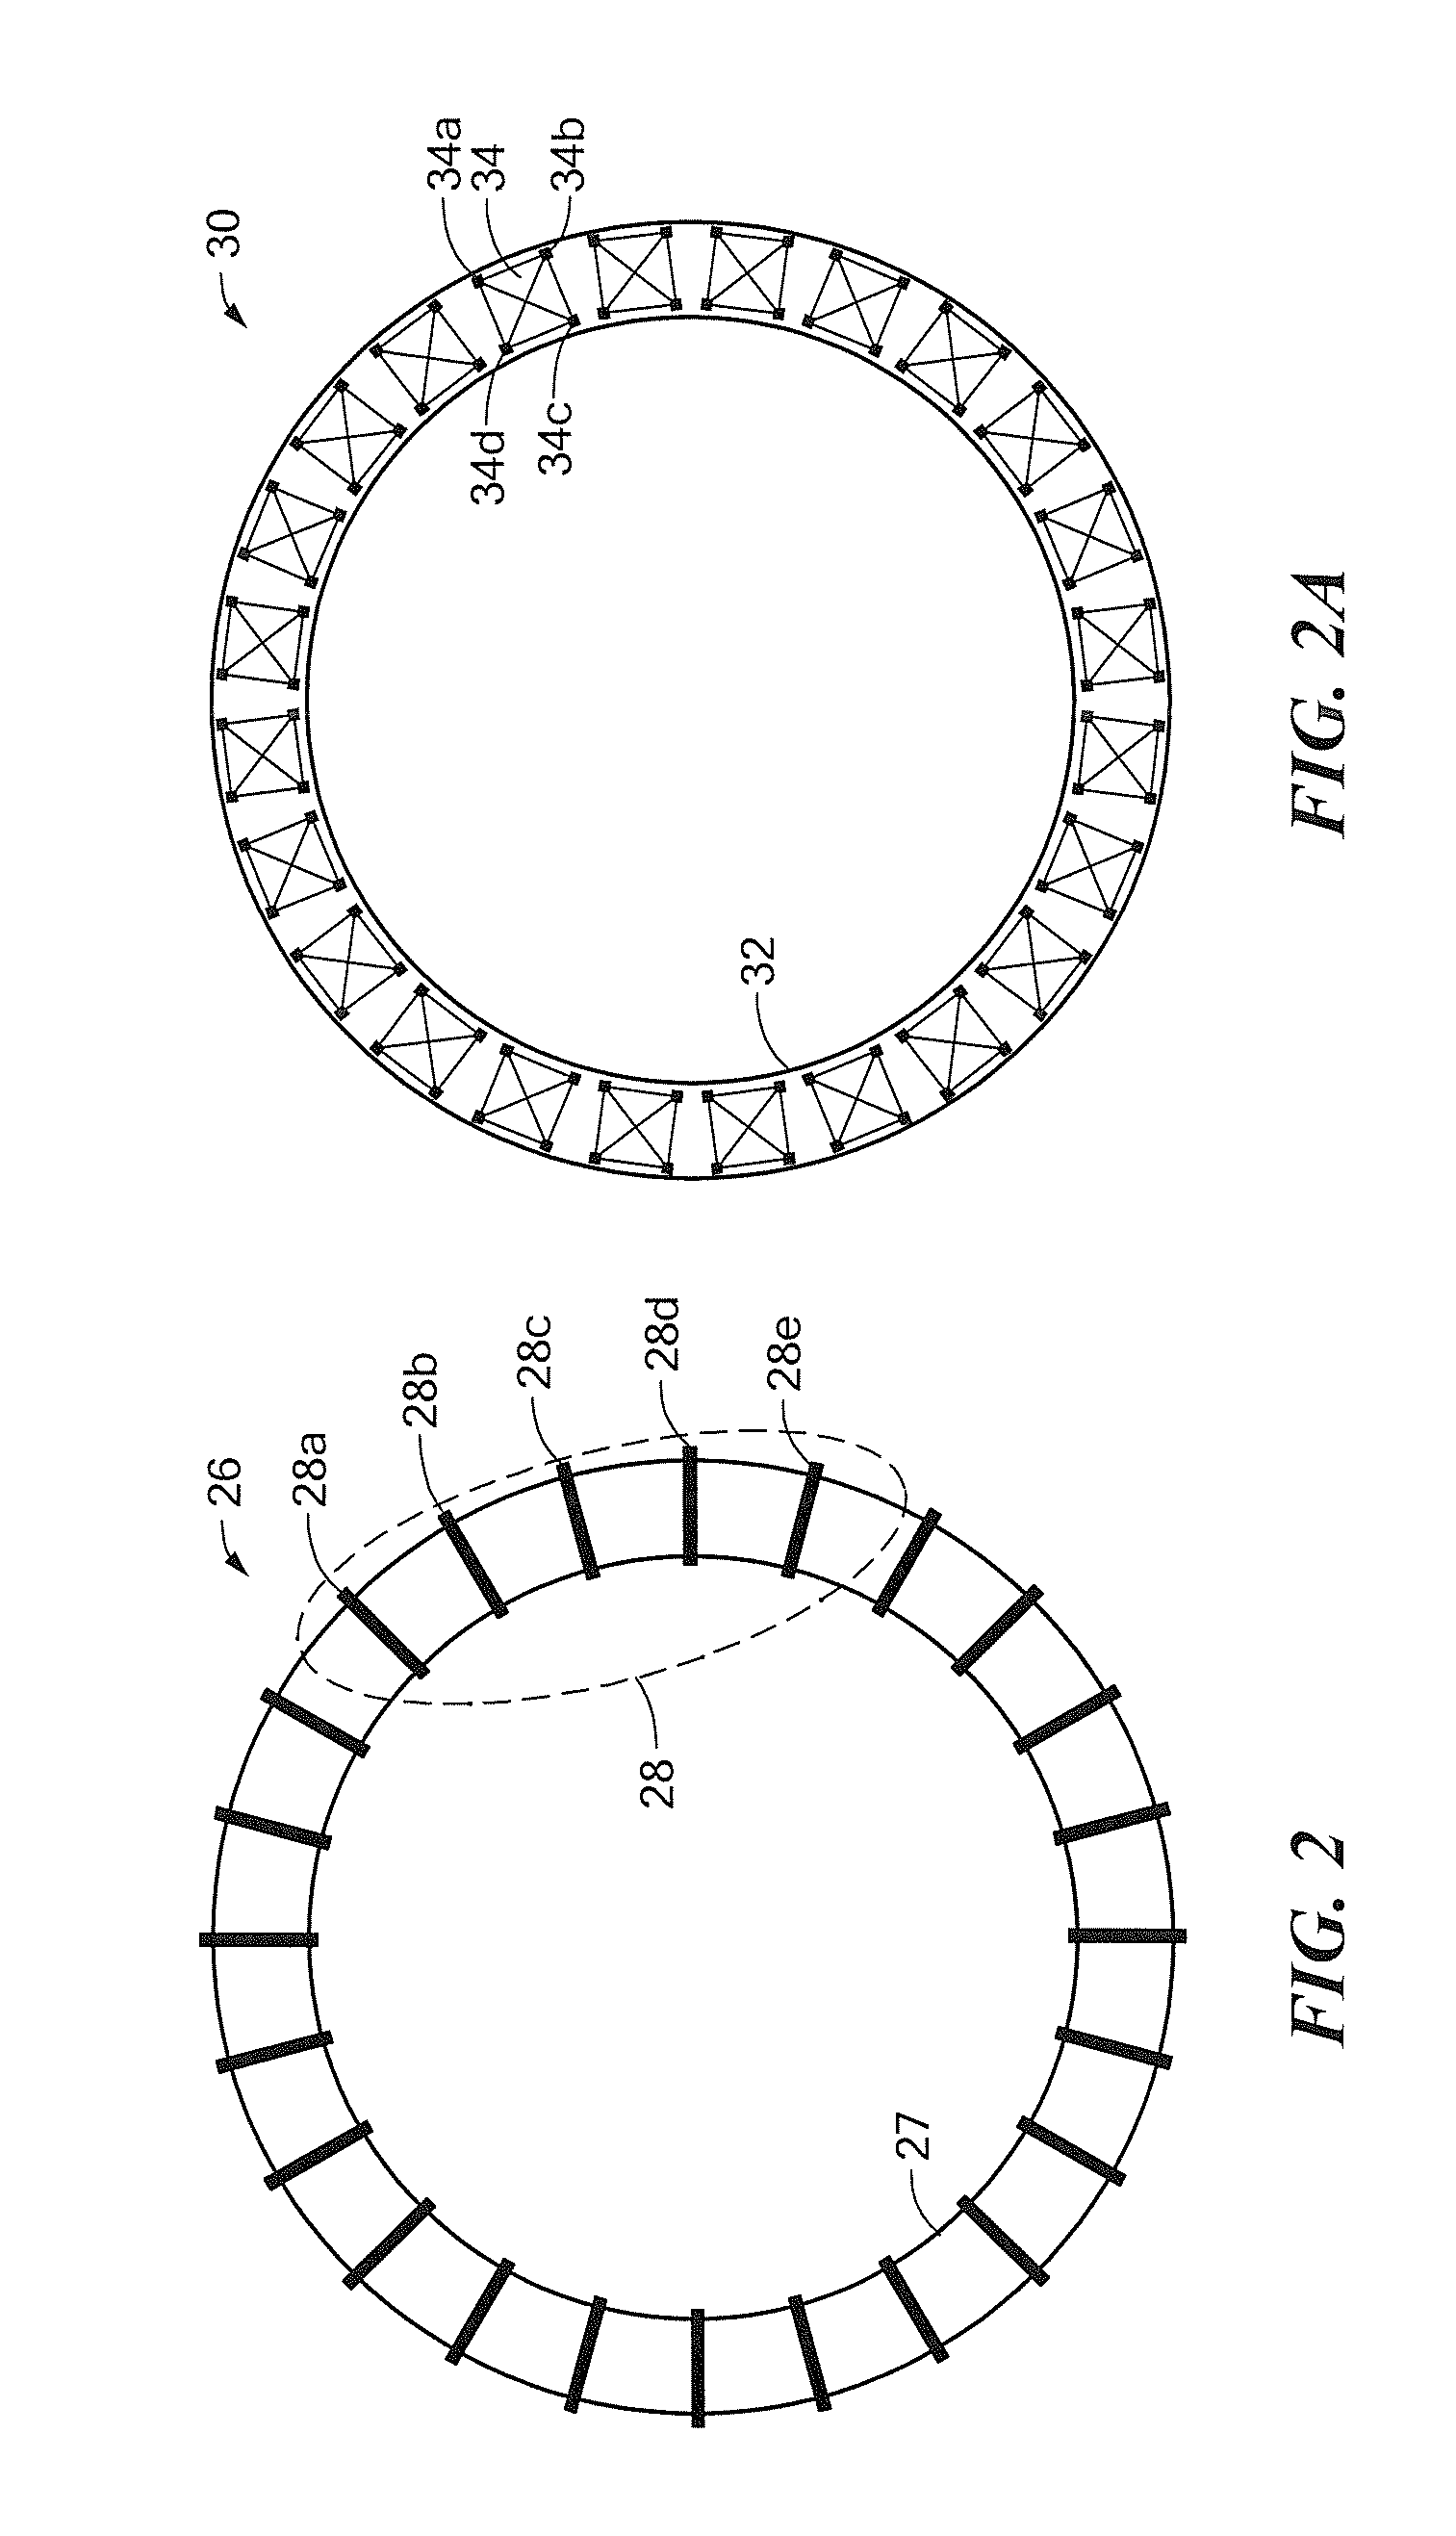 Magnetic field sensing element combining a circular vertical hall magnetic field sensing element with a planar hall element